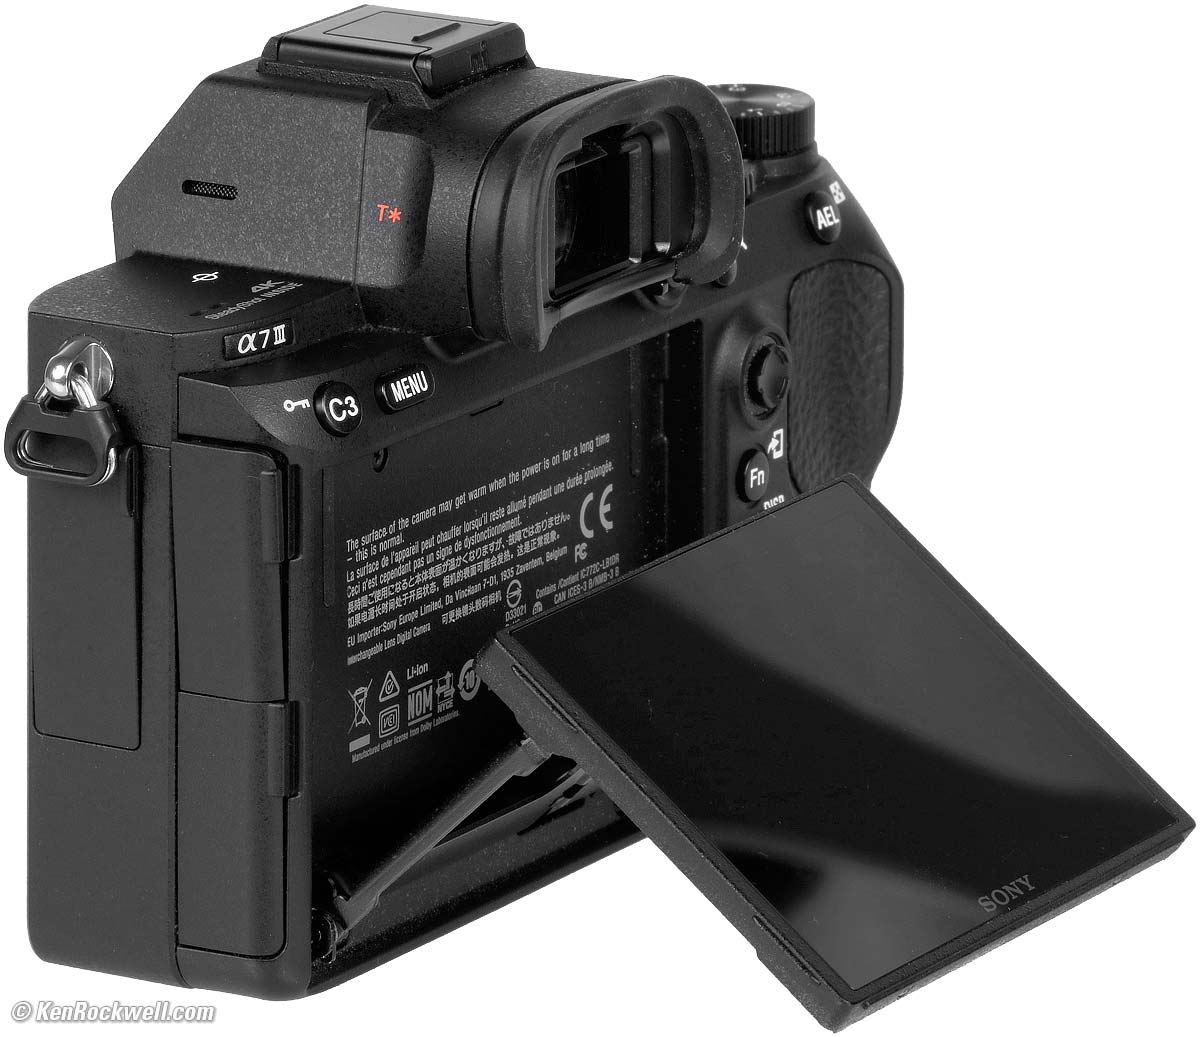 Sony a7iii specs, review and opinion - Videolinea System srl